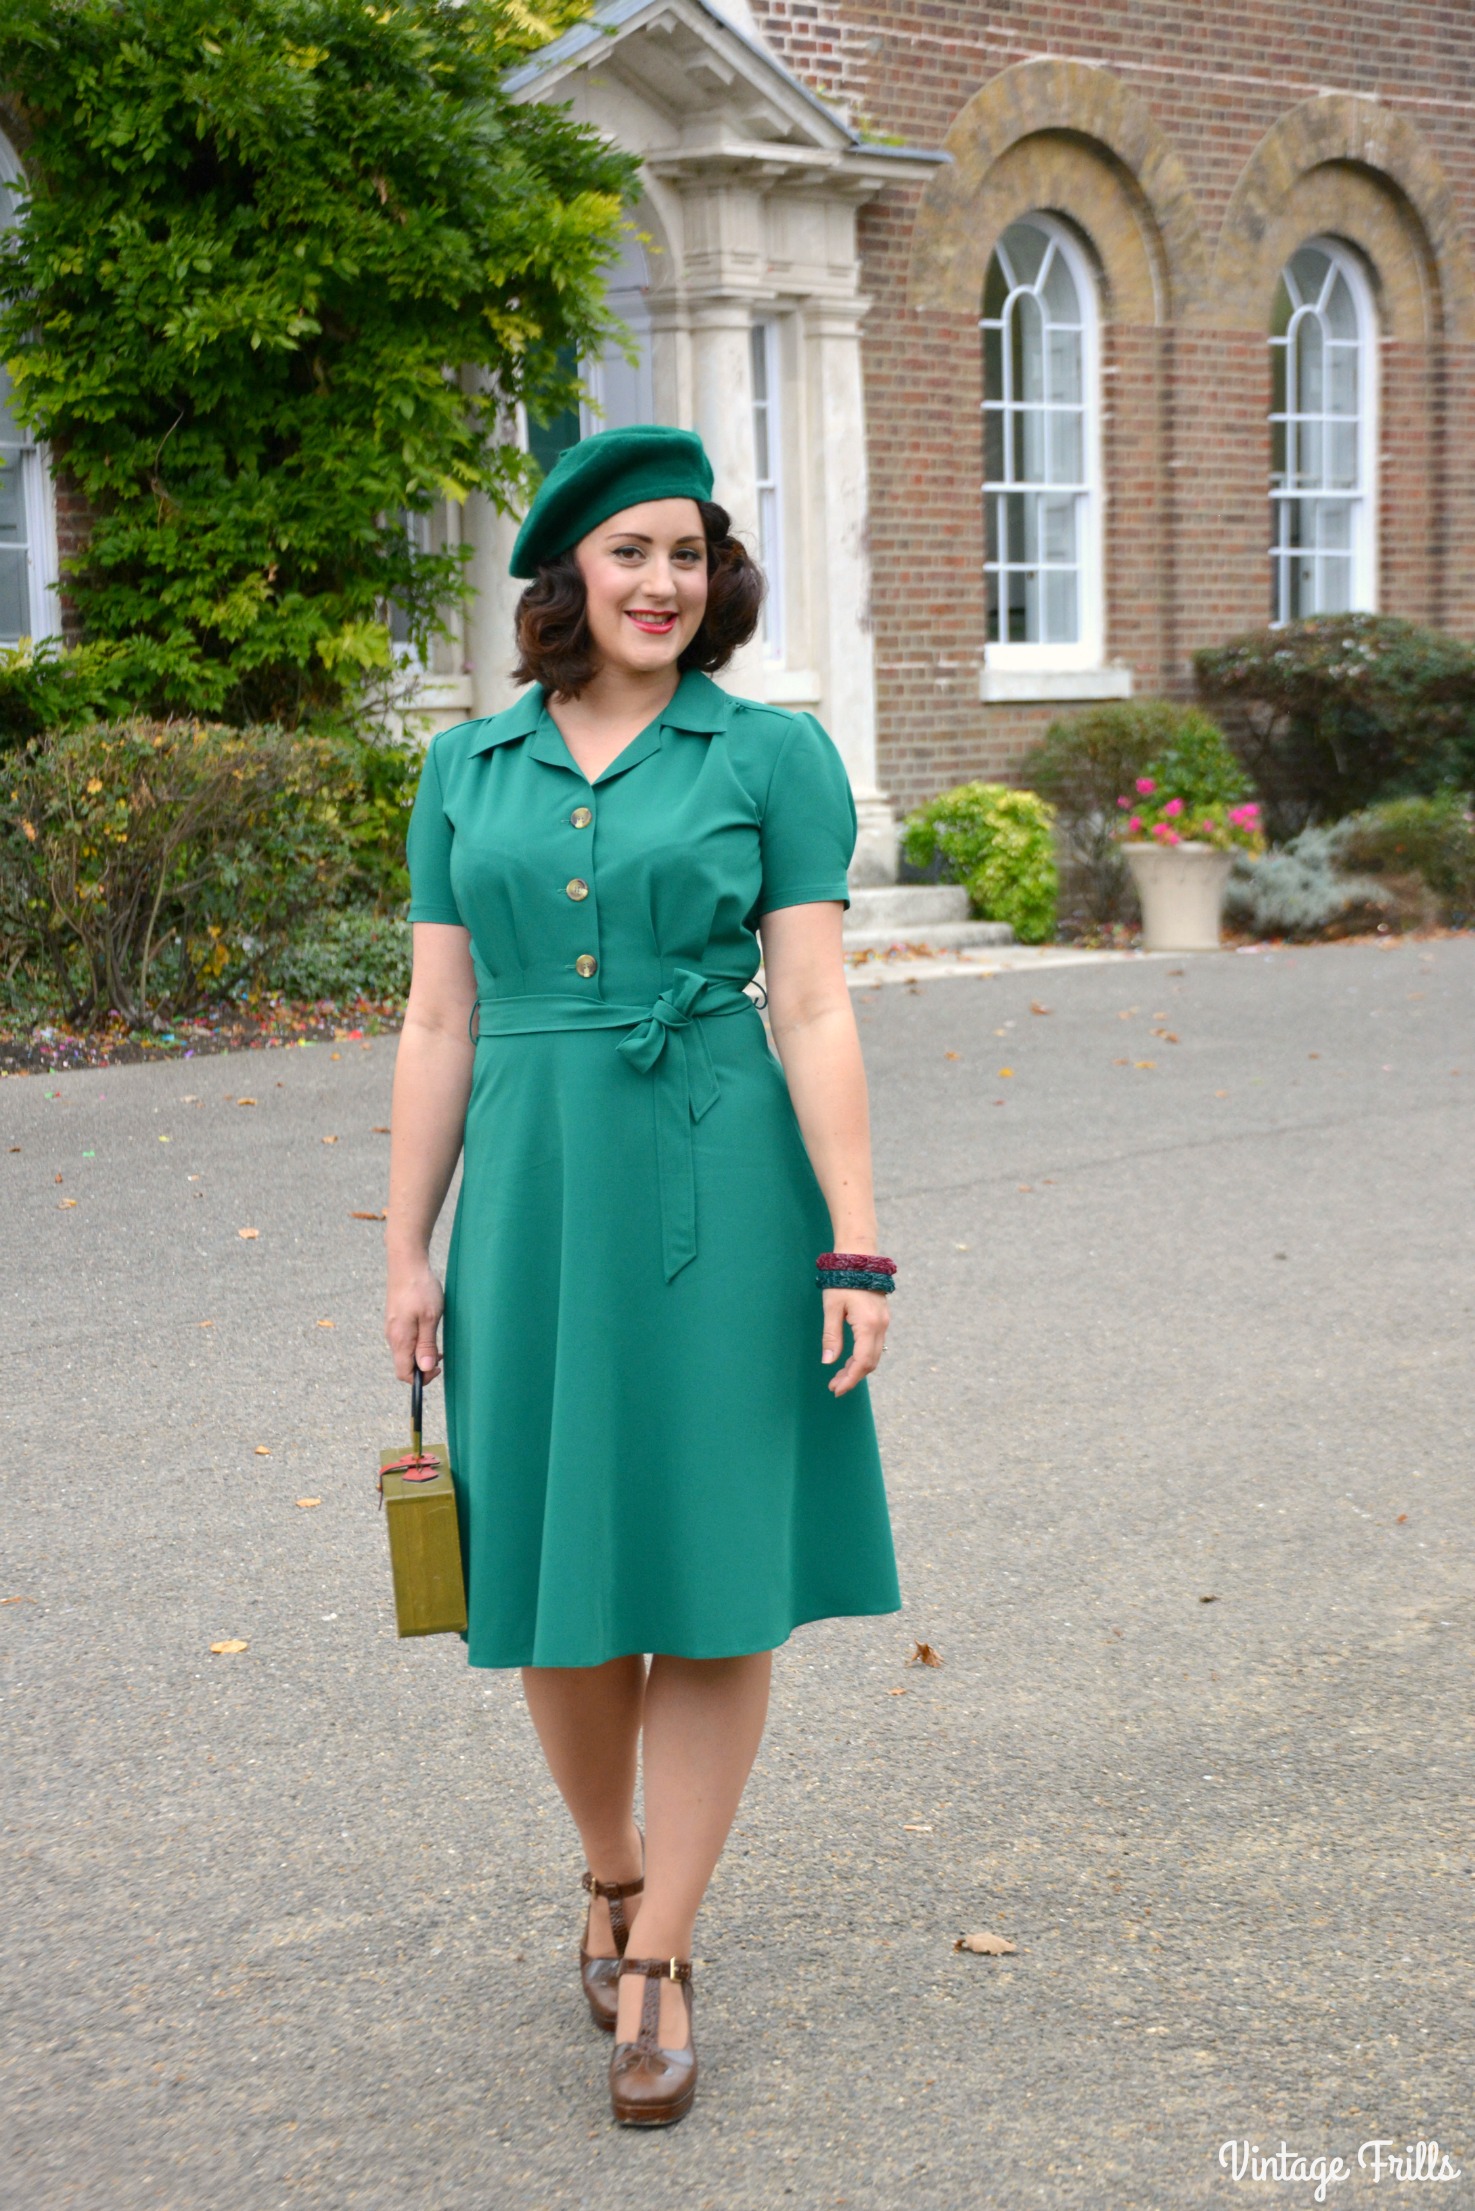 The Perfect 1940s Style Dress from Pretty Retro OOTD • Vintage Frills